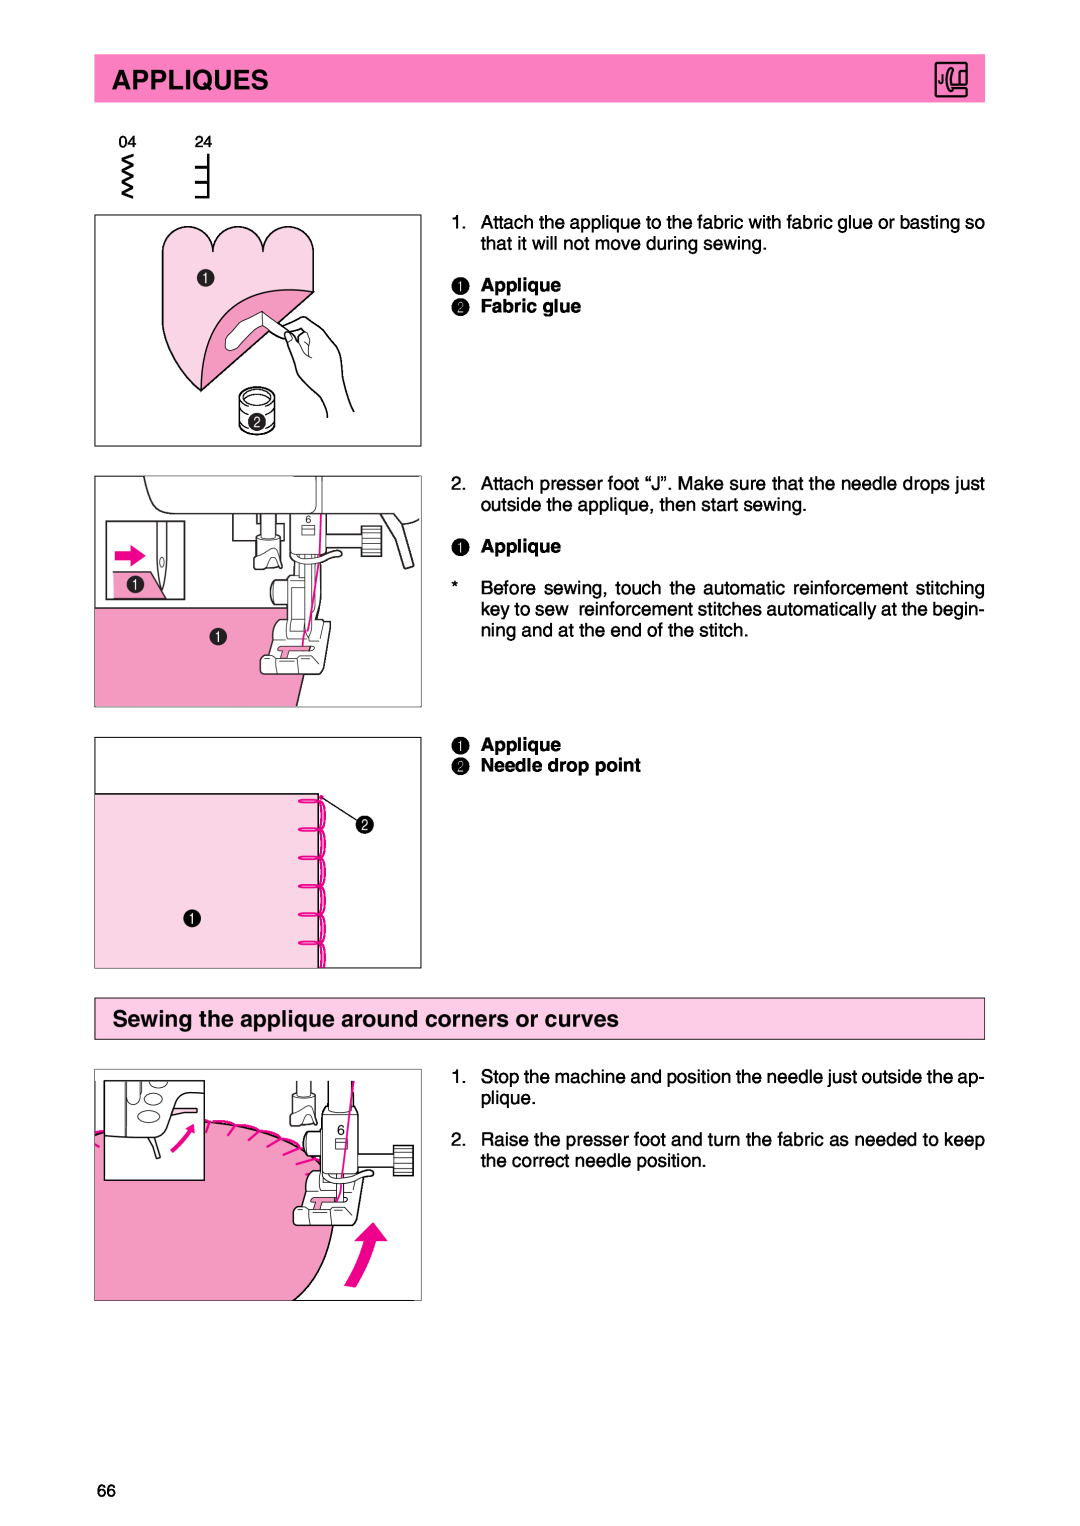 Brother PC 3000 operation manual Appliques, Sewing the applique around corners or curves, Applique 2 Fabric glue 